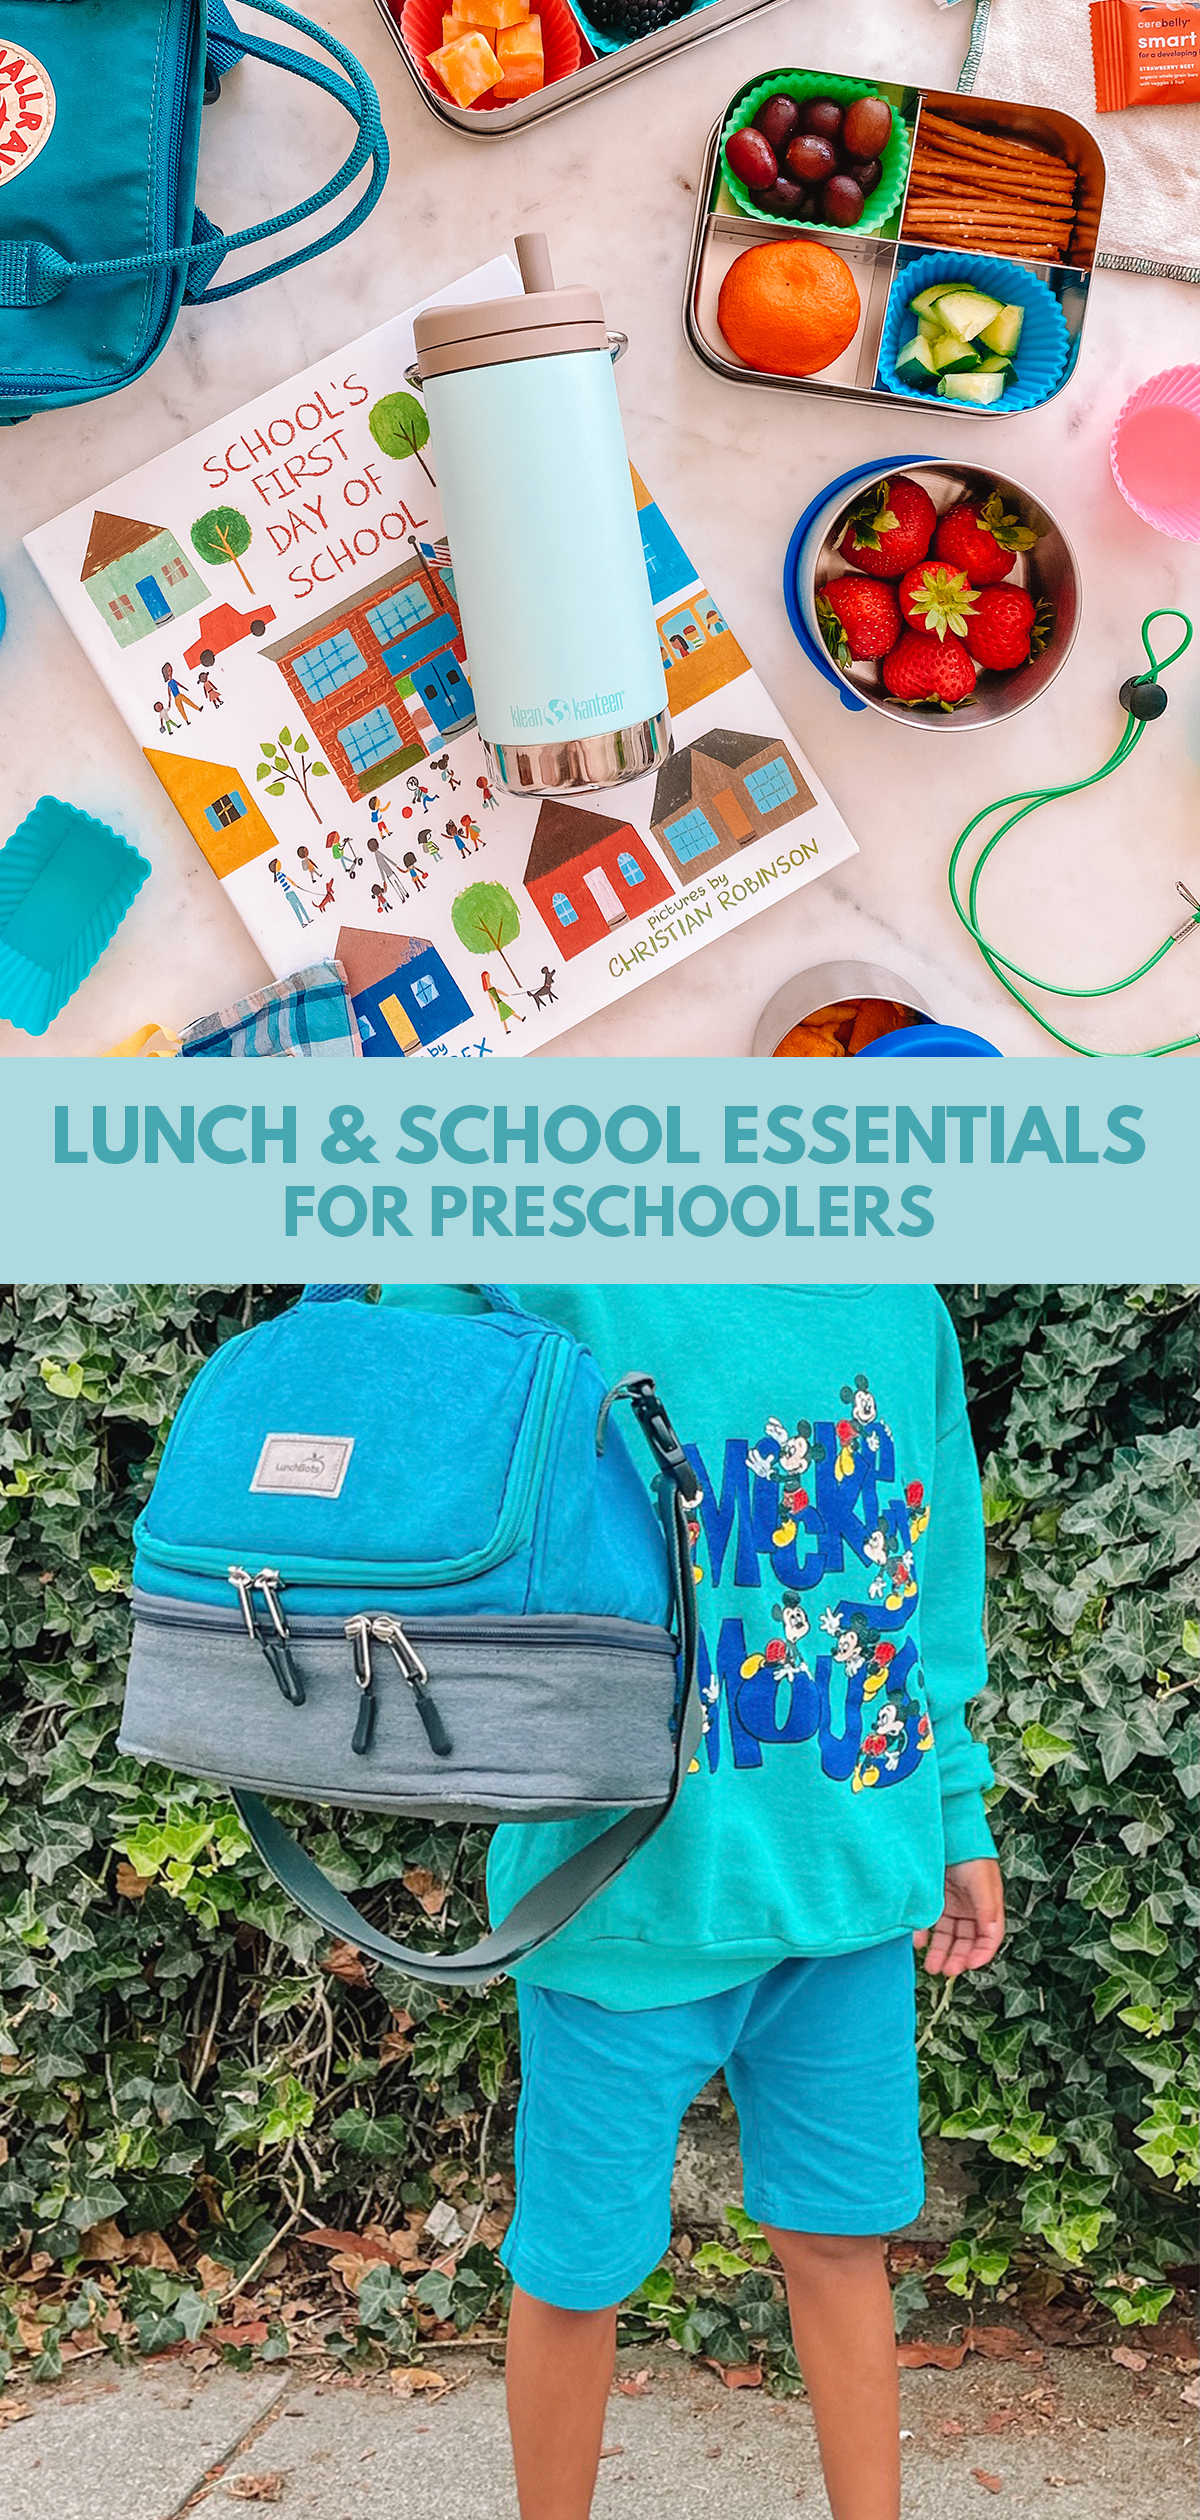 Our favorite lunch box, water bottle, school clothes, masks and more for our preschooler!